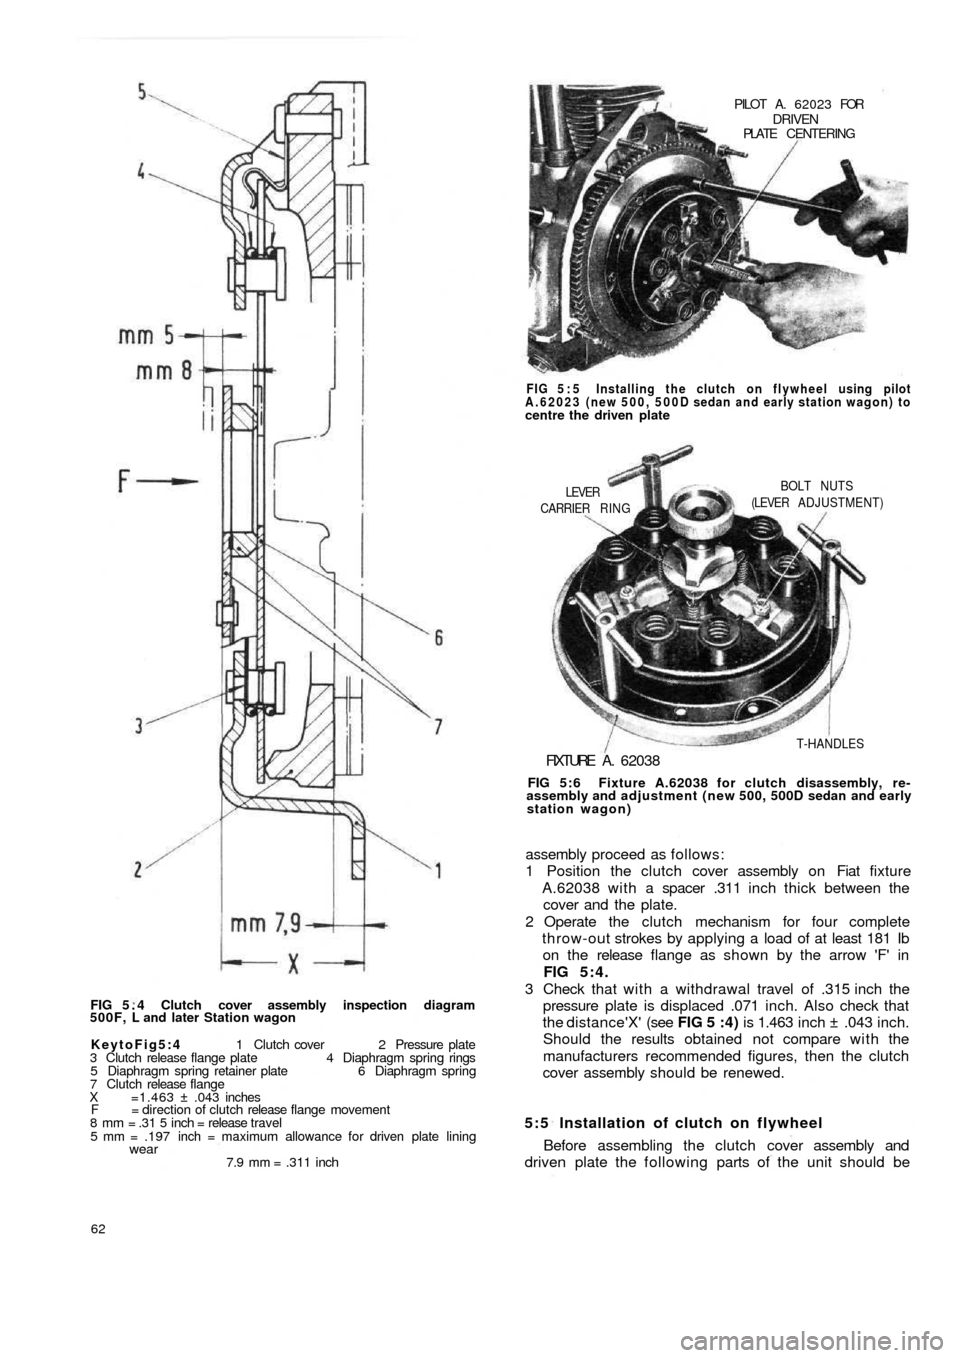 FIAT 500 1969 1.G Workshop Manual FIG 5 . 4  Clutch cover assembly inspection diagram
500F, L and later Station wagon
KeytoFig5:4 1 Clutch cover 2 Pressure plate
3 Clutch release flange plate 4 Diaphragm spring rings
5 Diaphragm sprin